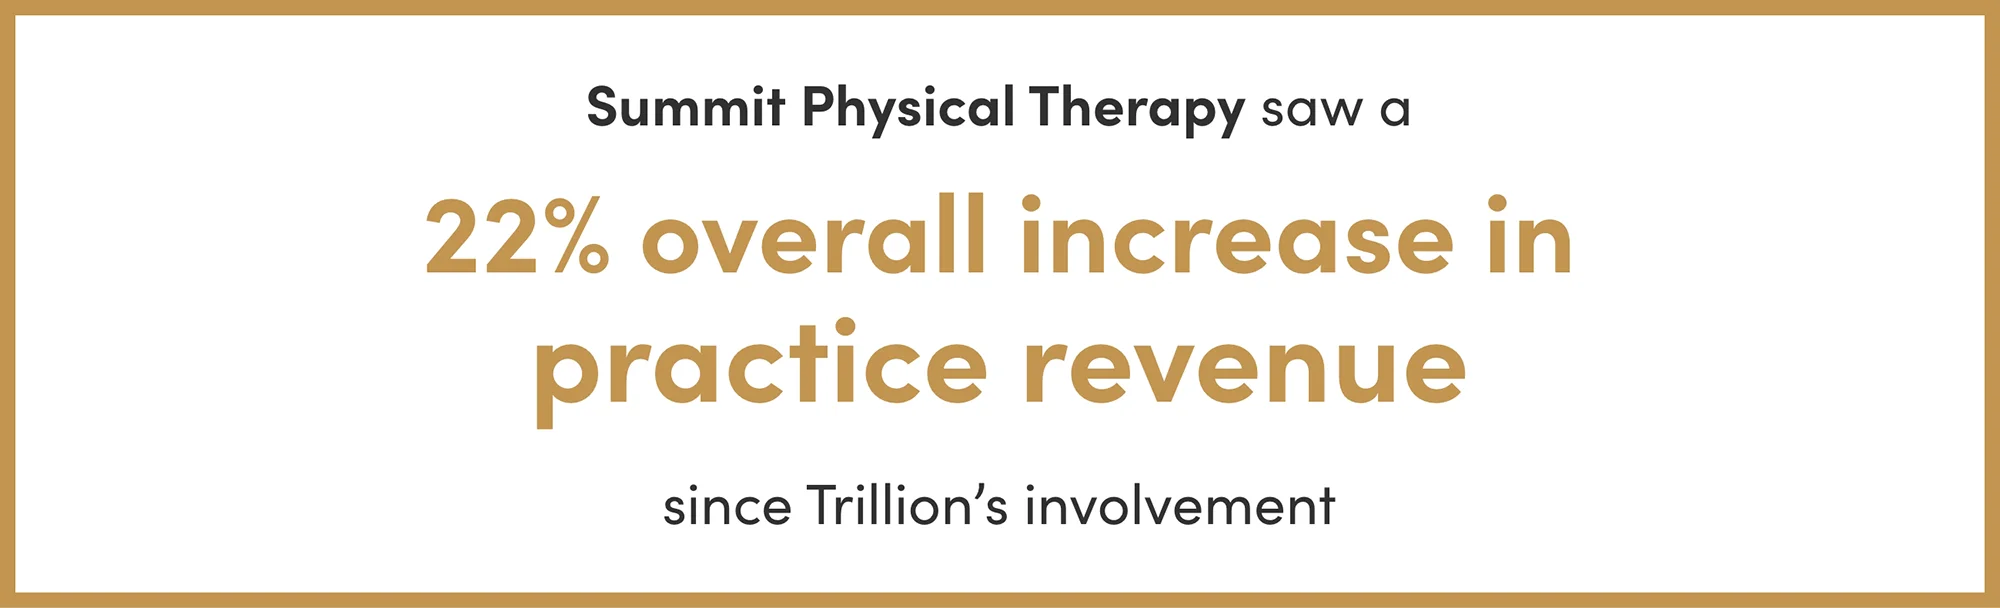 Summit Physical Therapy saw a 22% overall increase in practice revenue since Trillion’s involvement